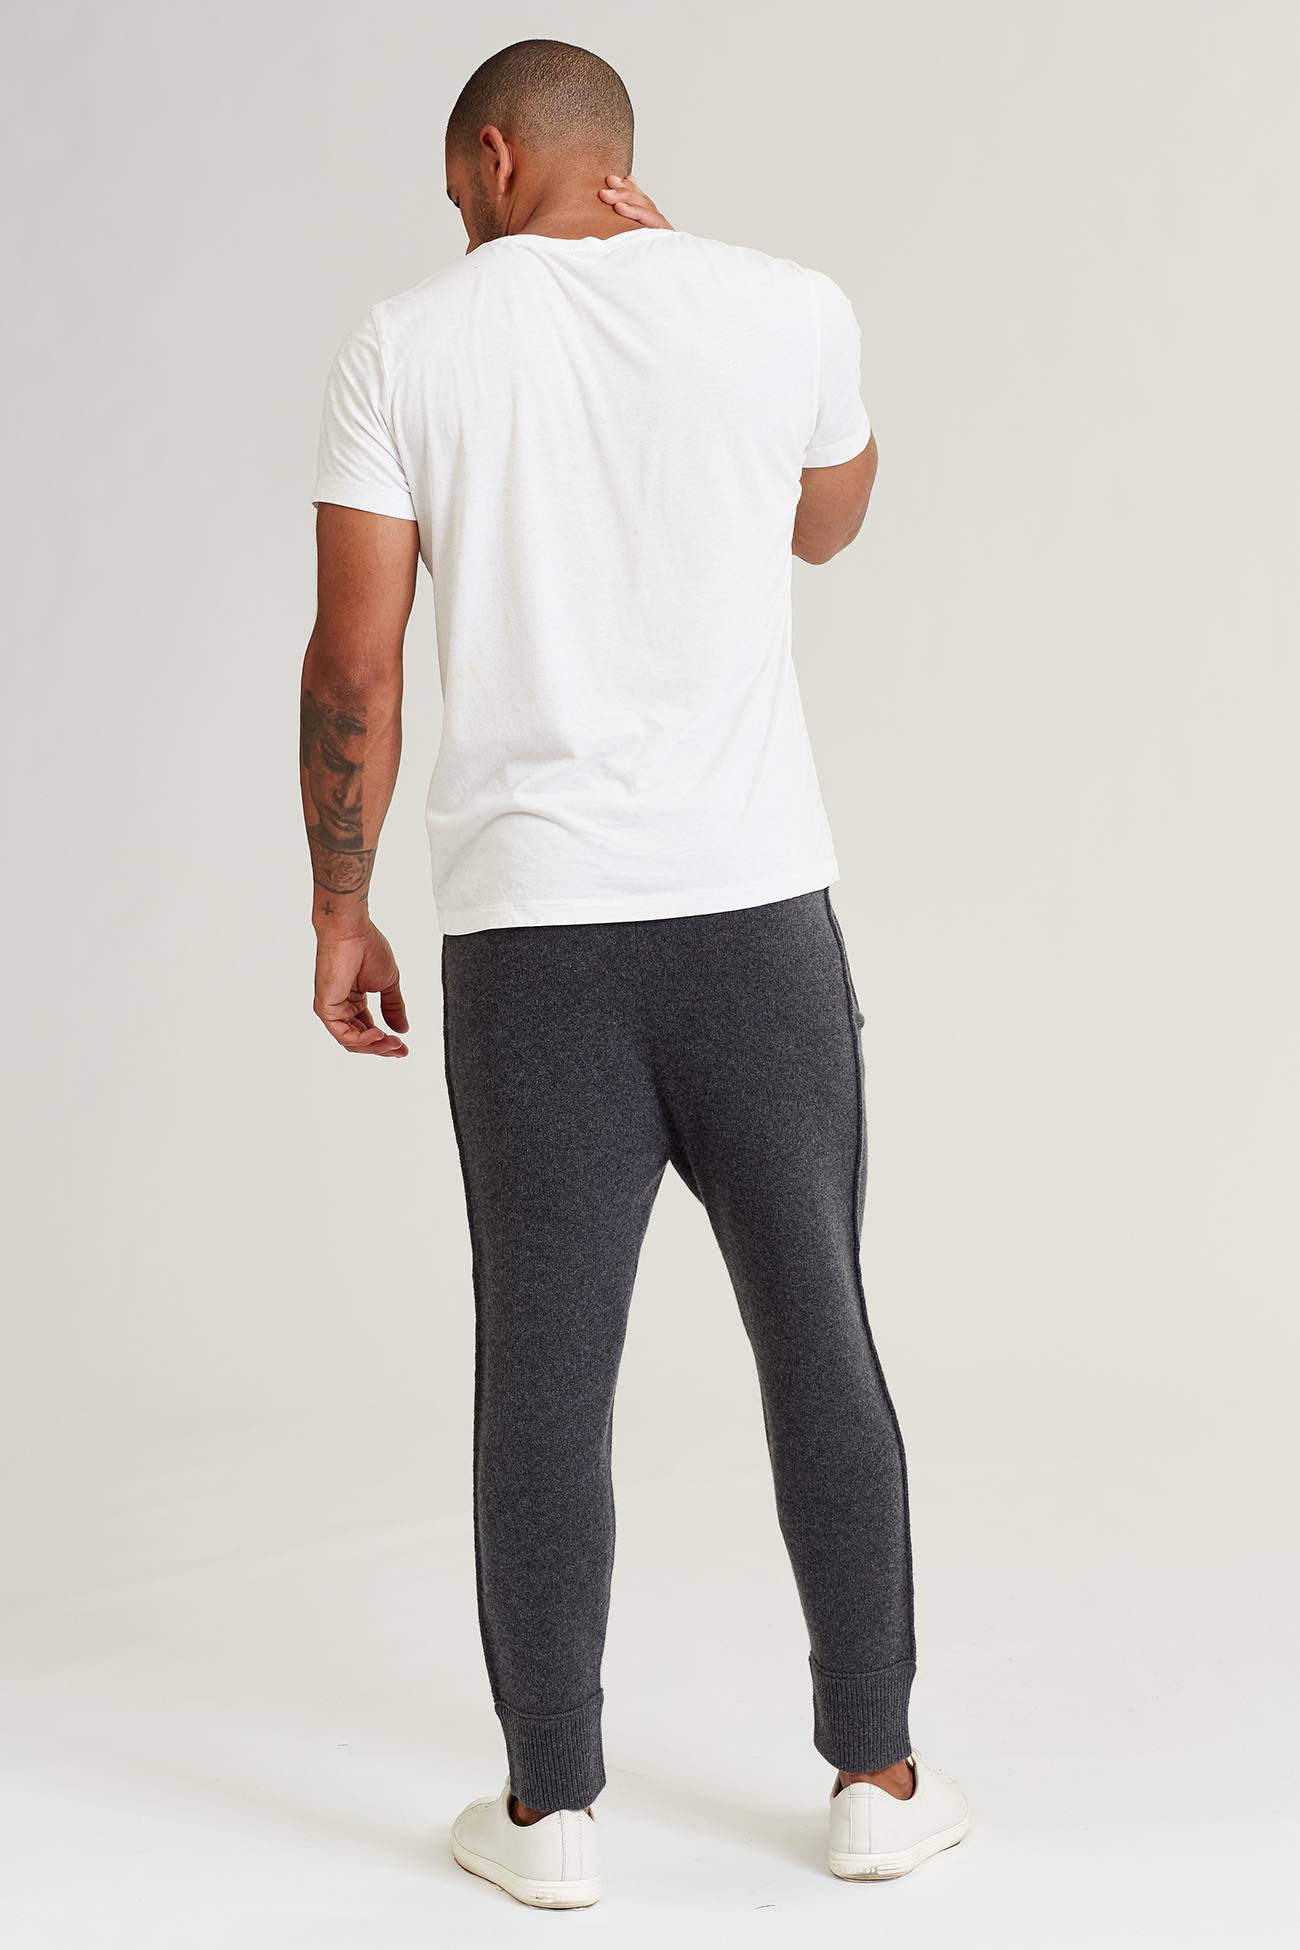 Download 33+ Mens Heather Cuffed Sweatpants Front Left Half-Side ...